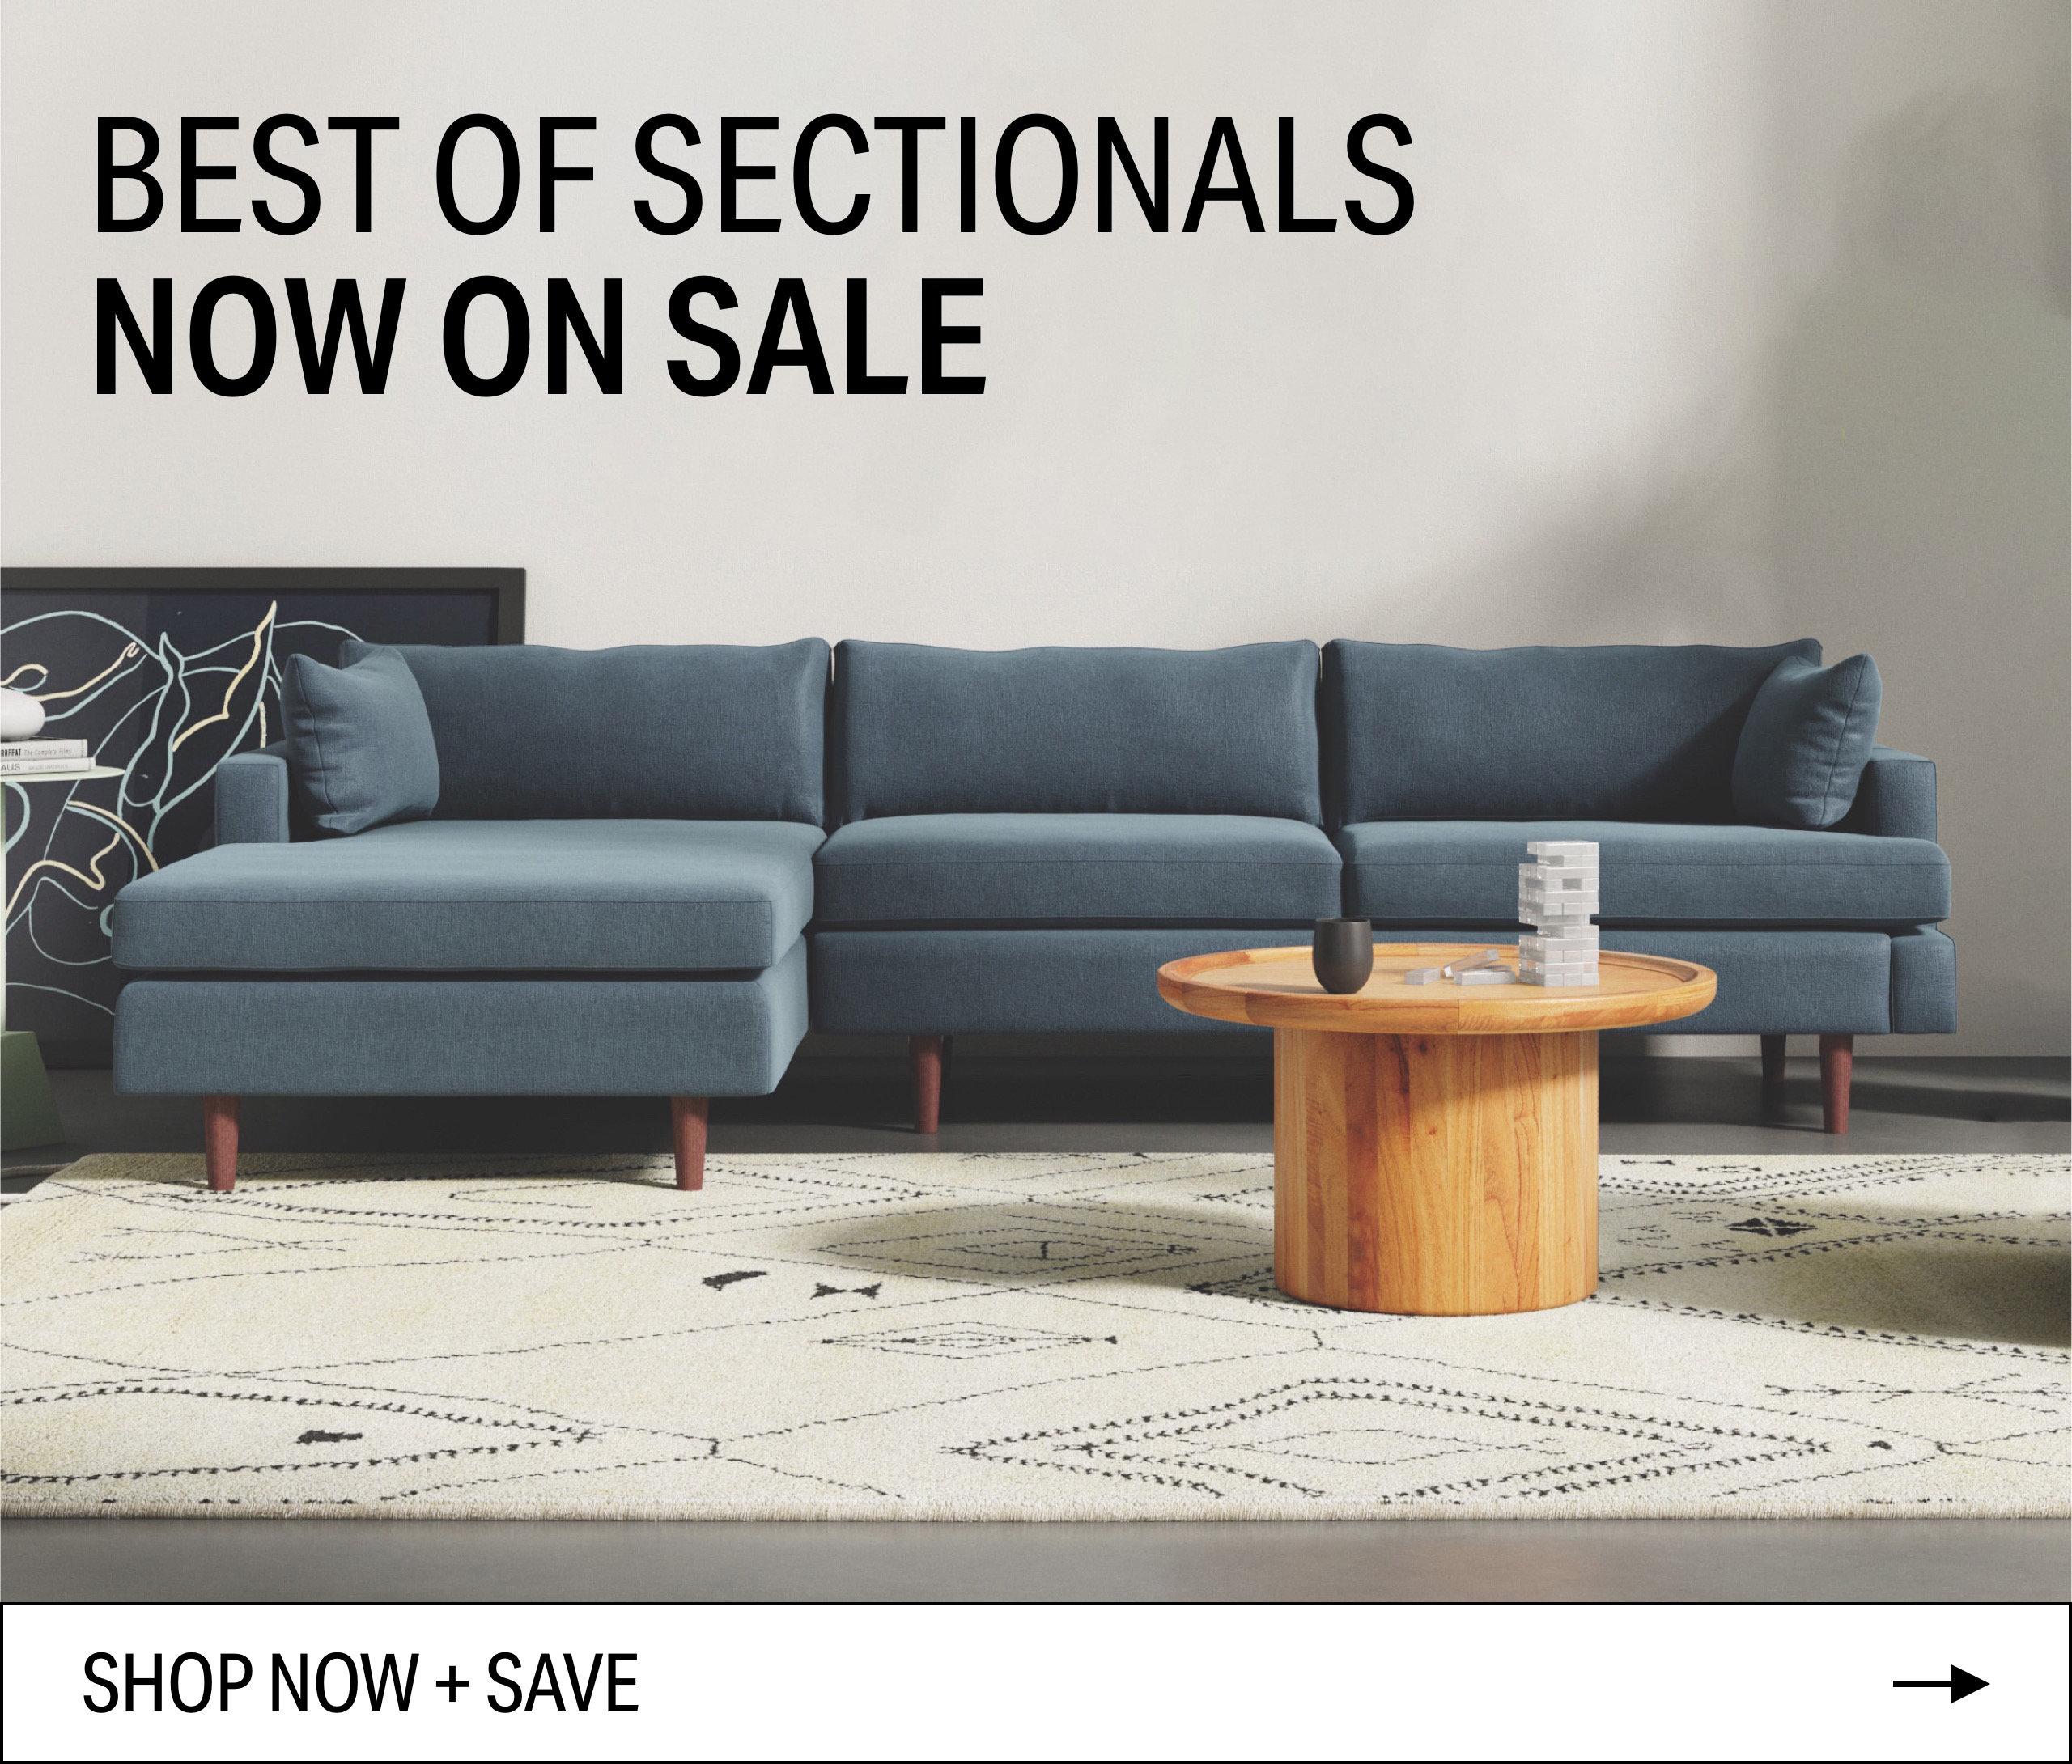 BEST OF SECTIONALS NOW ON SALE s i - T s i P Y b et s SHOP NOW SAVE 